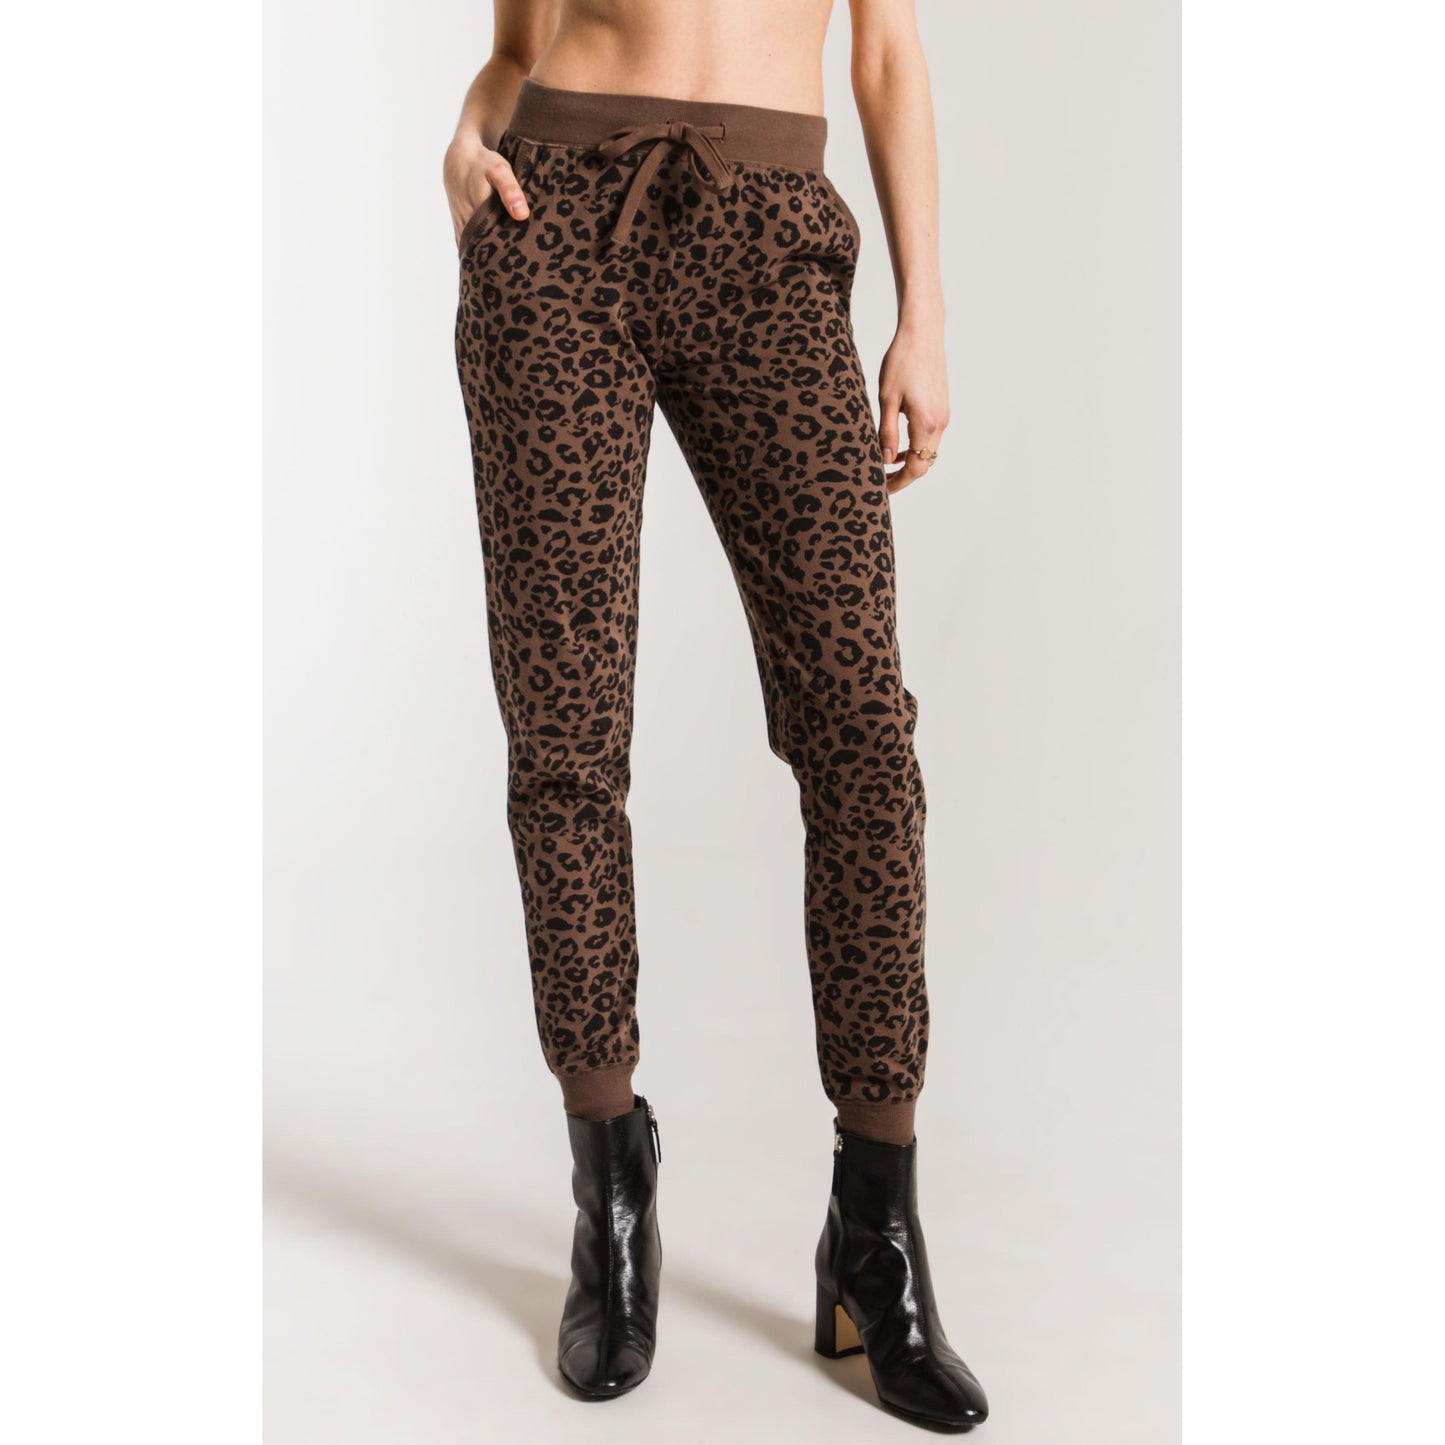 The Leopard Jogger